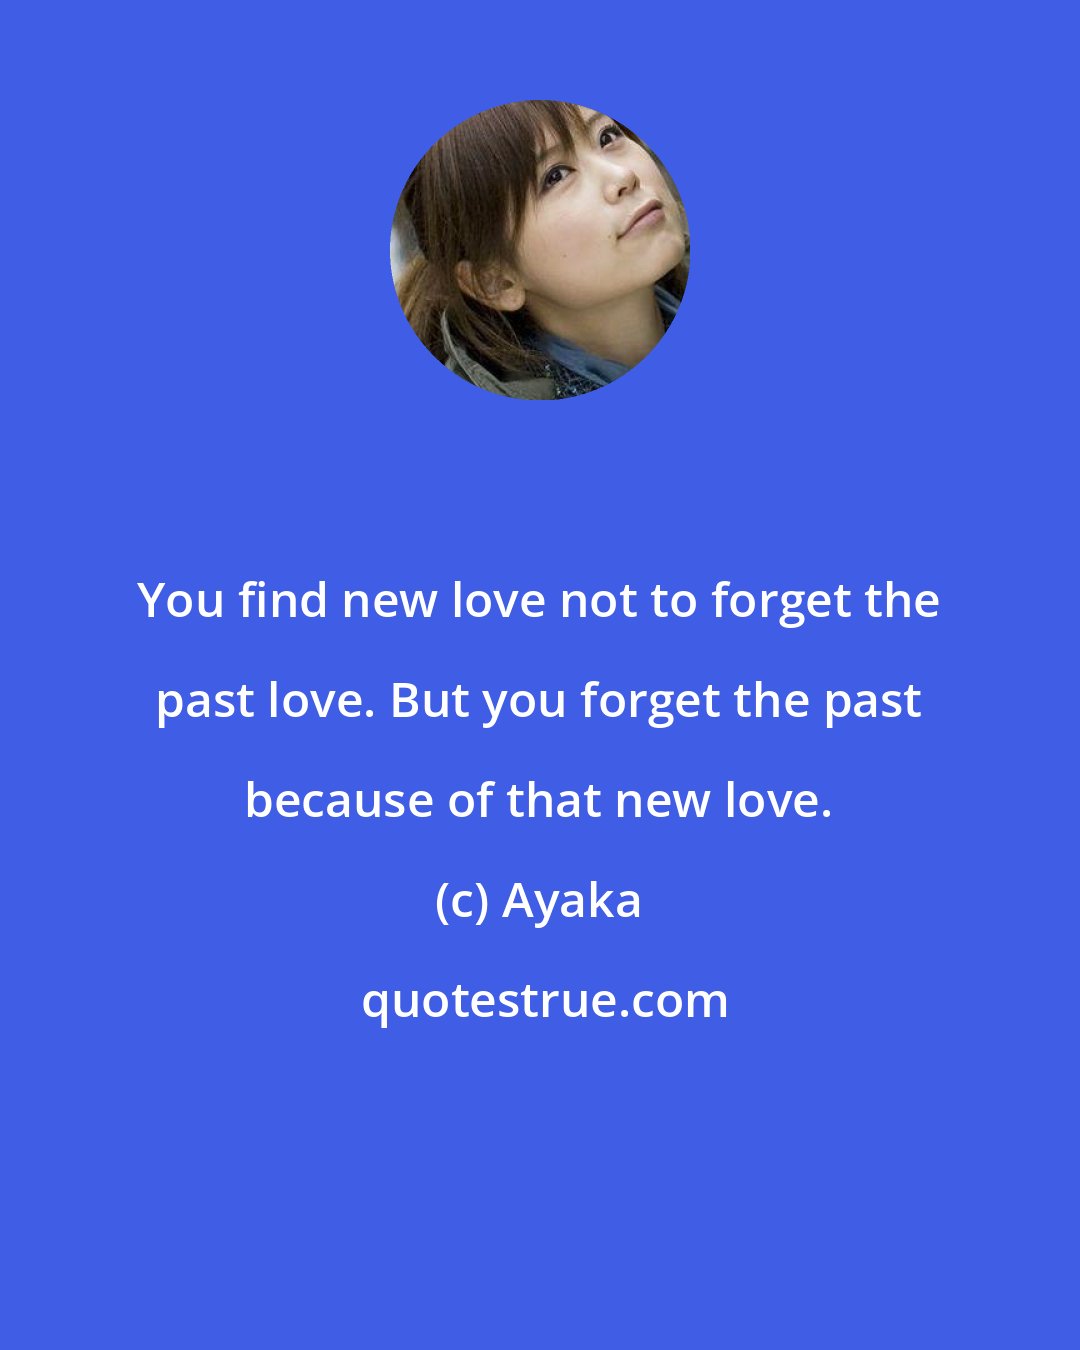 Ayaka: You find new love not to forget the past love. But you forget the past because of that new love.